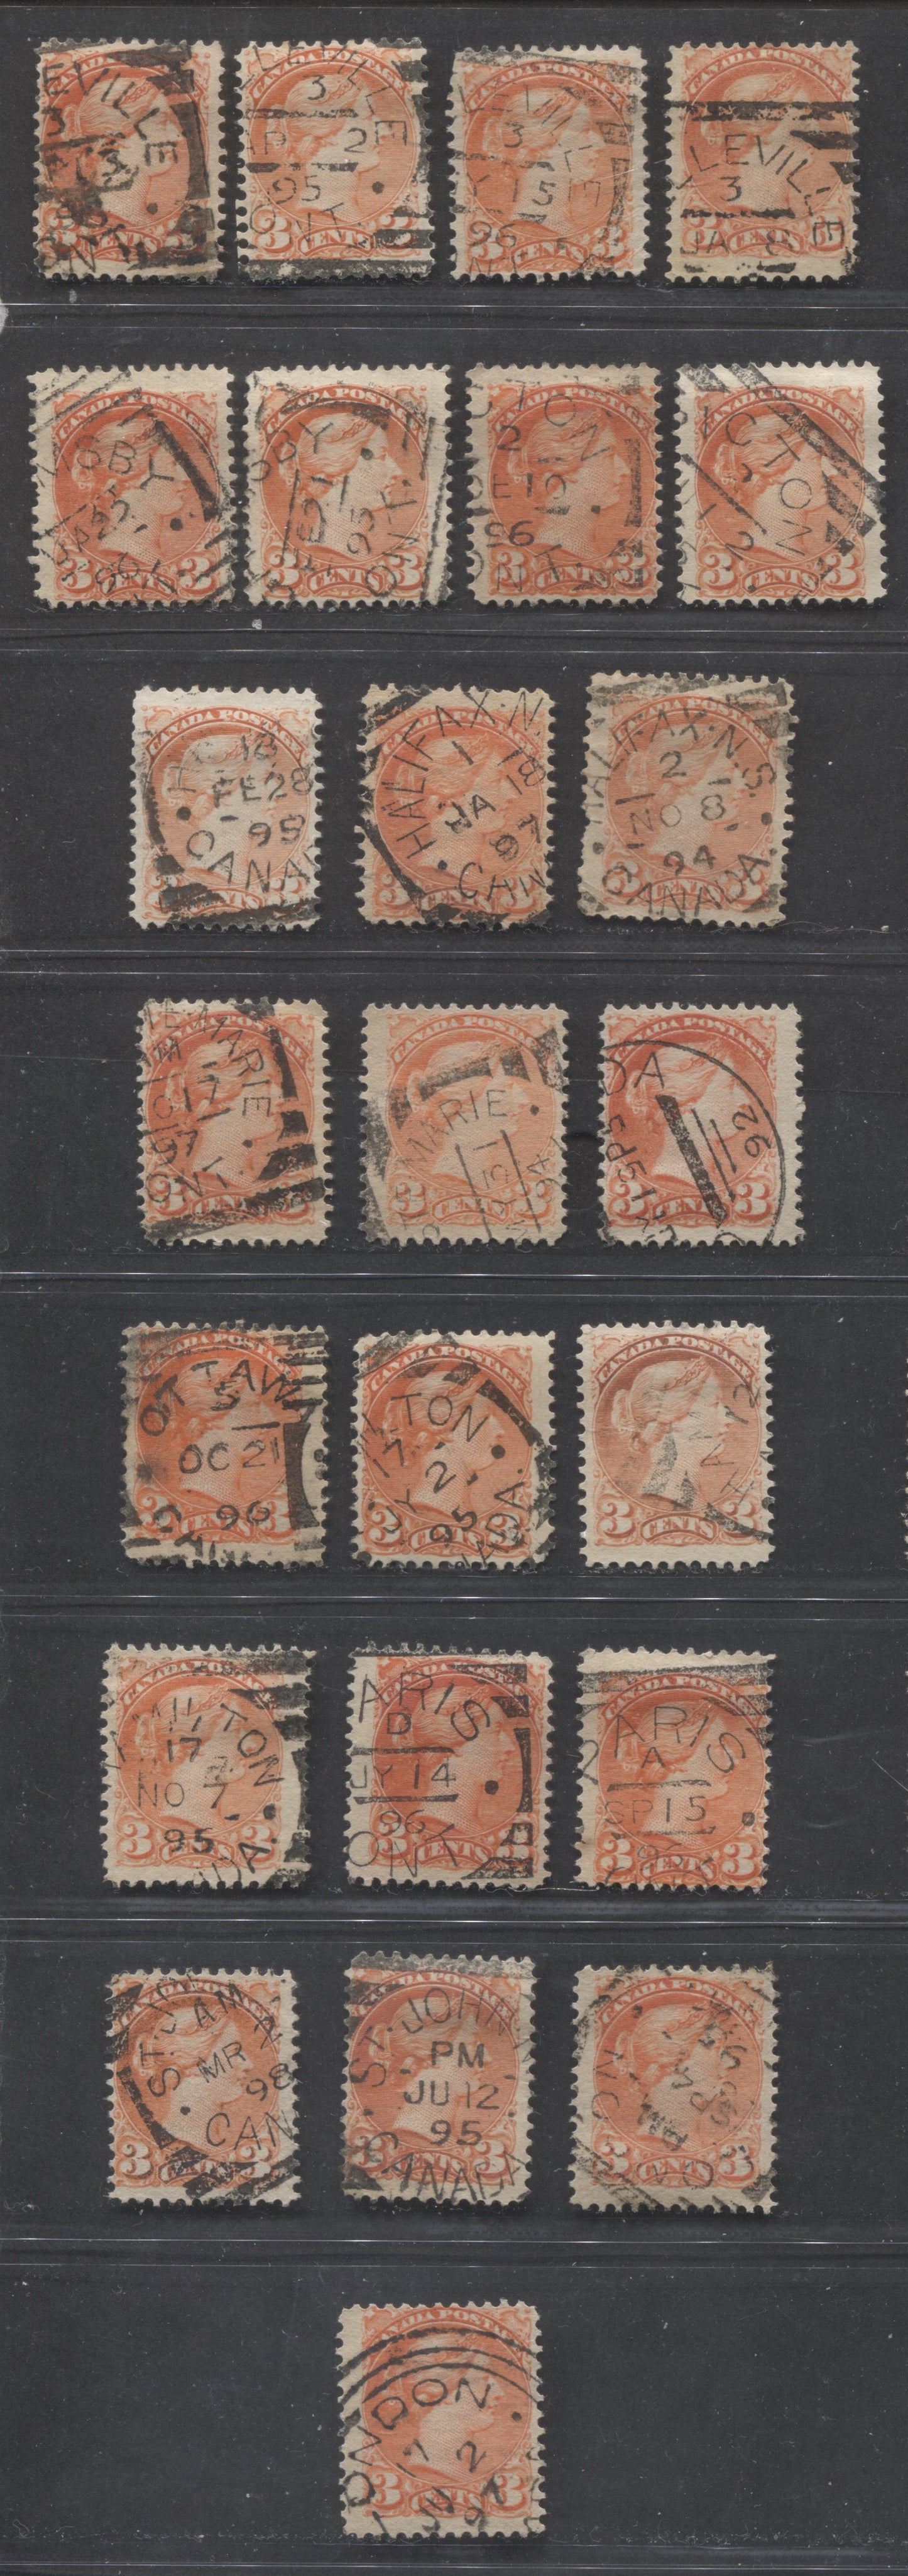 Lot 225 Canada #41 3c Vermilion Queen Victoria, 1870-1897 Small Queen Issue, 24 Fine Used Singles, All With Full to Partial, Dated Squared Circle Cancels, 2nd Ottawa Printings